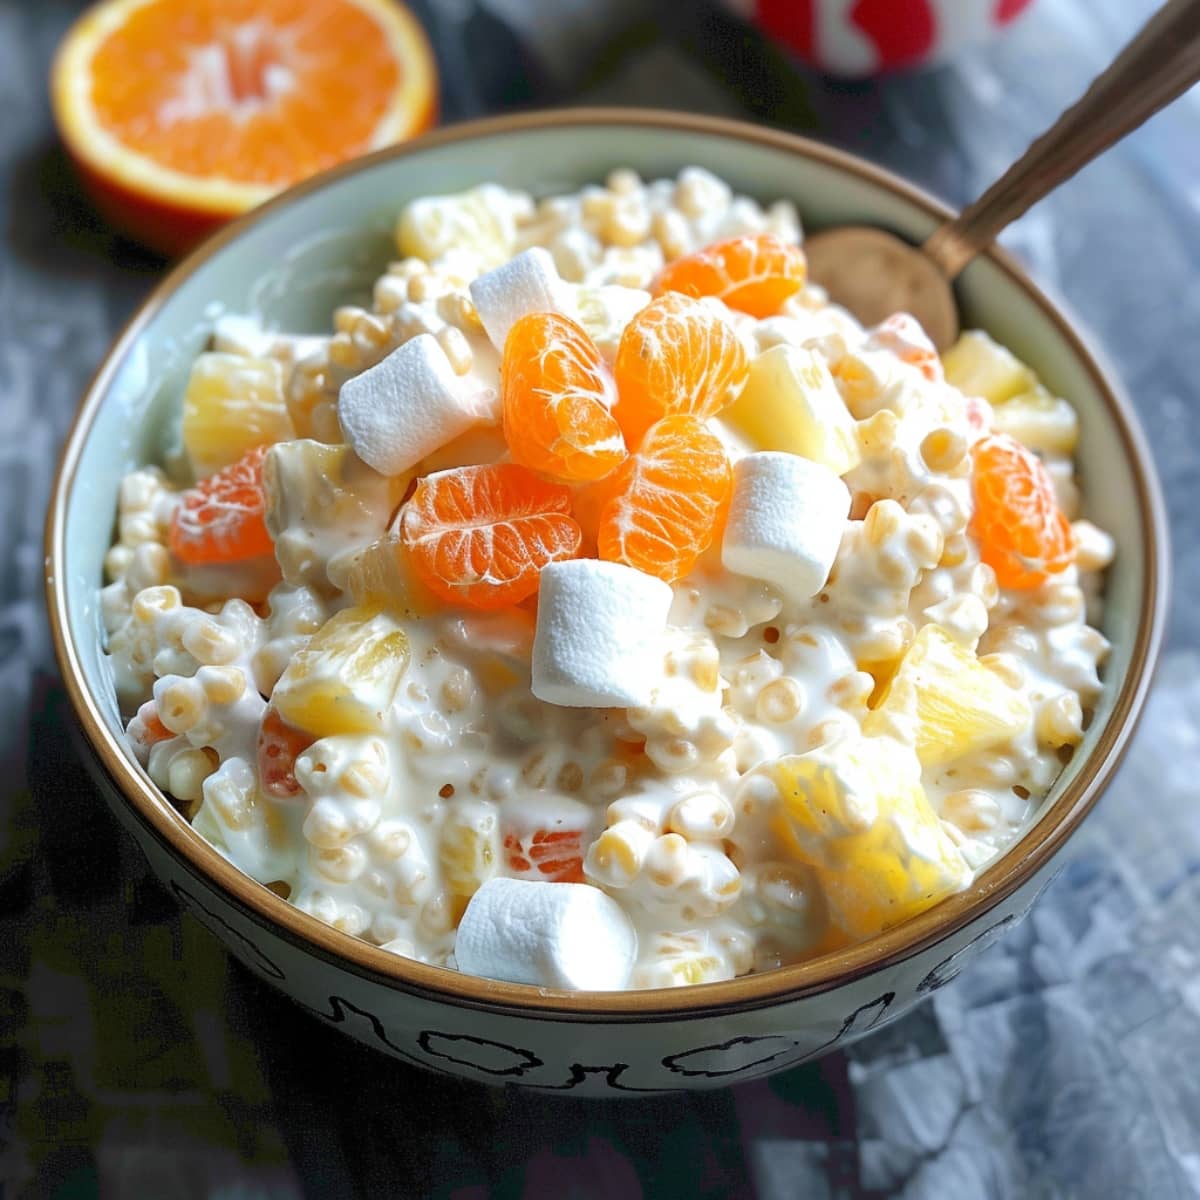 A bowl of frog eye salad with oranges, marshmallows and pineapple tidbits